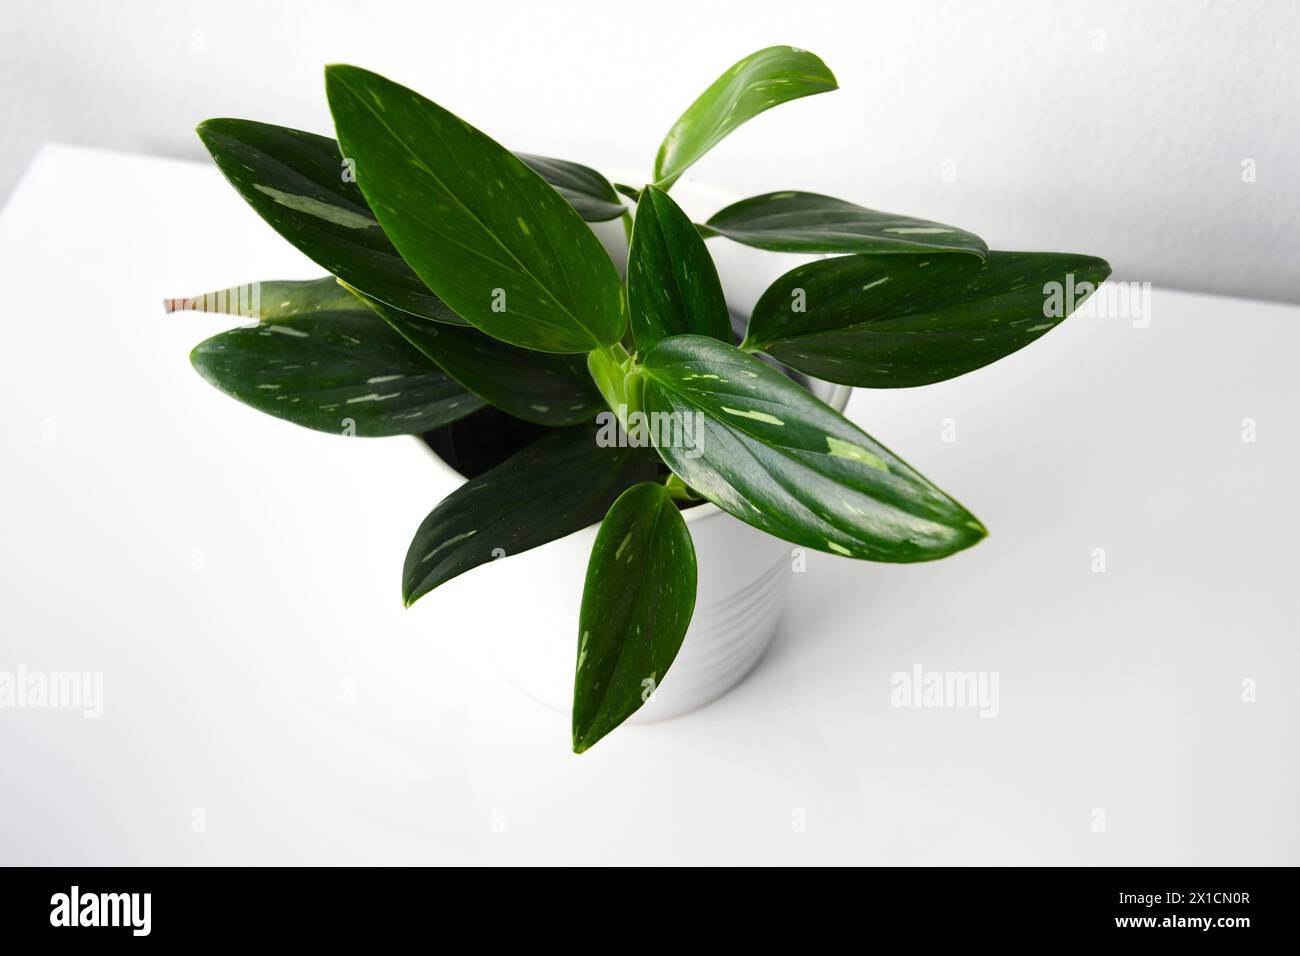 Vining philodendron, plant with green leaves and white variegation in a white pot. Isolated on a white background. Landscape orientation, from above. Stock Photo